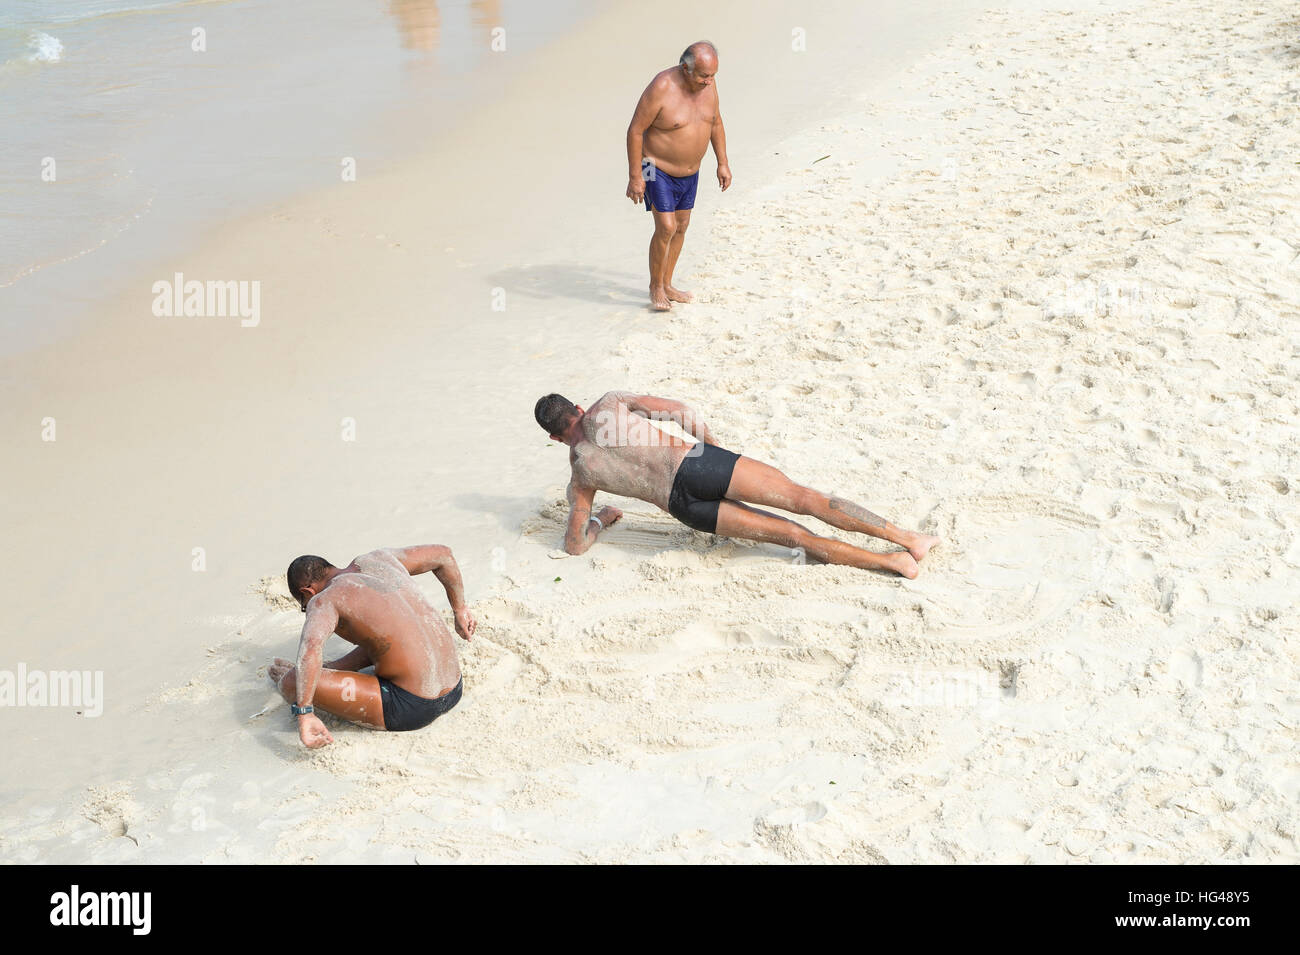 Beach Lifeguard Training High Resolution Stock Photography and Images -  Alamy